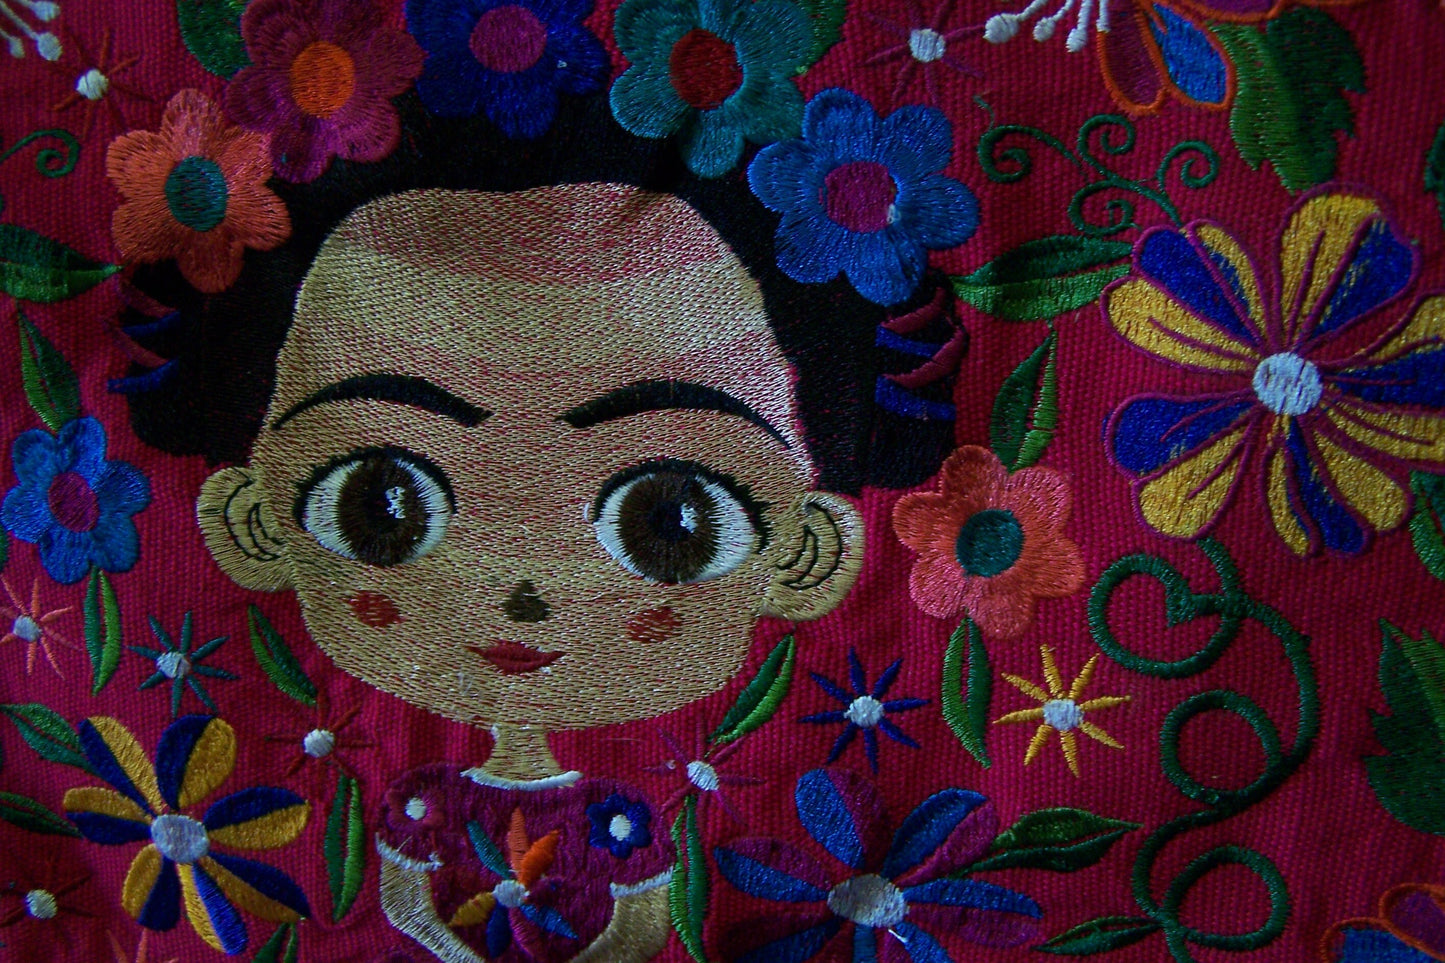 Frida! Large Embroidered Leather Shoulder Bag Purse, Lined Interior, 2 Zipper Pouches, Young Frida Kahlo - Red